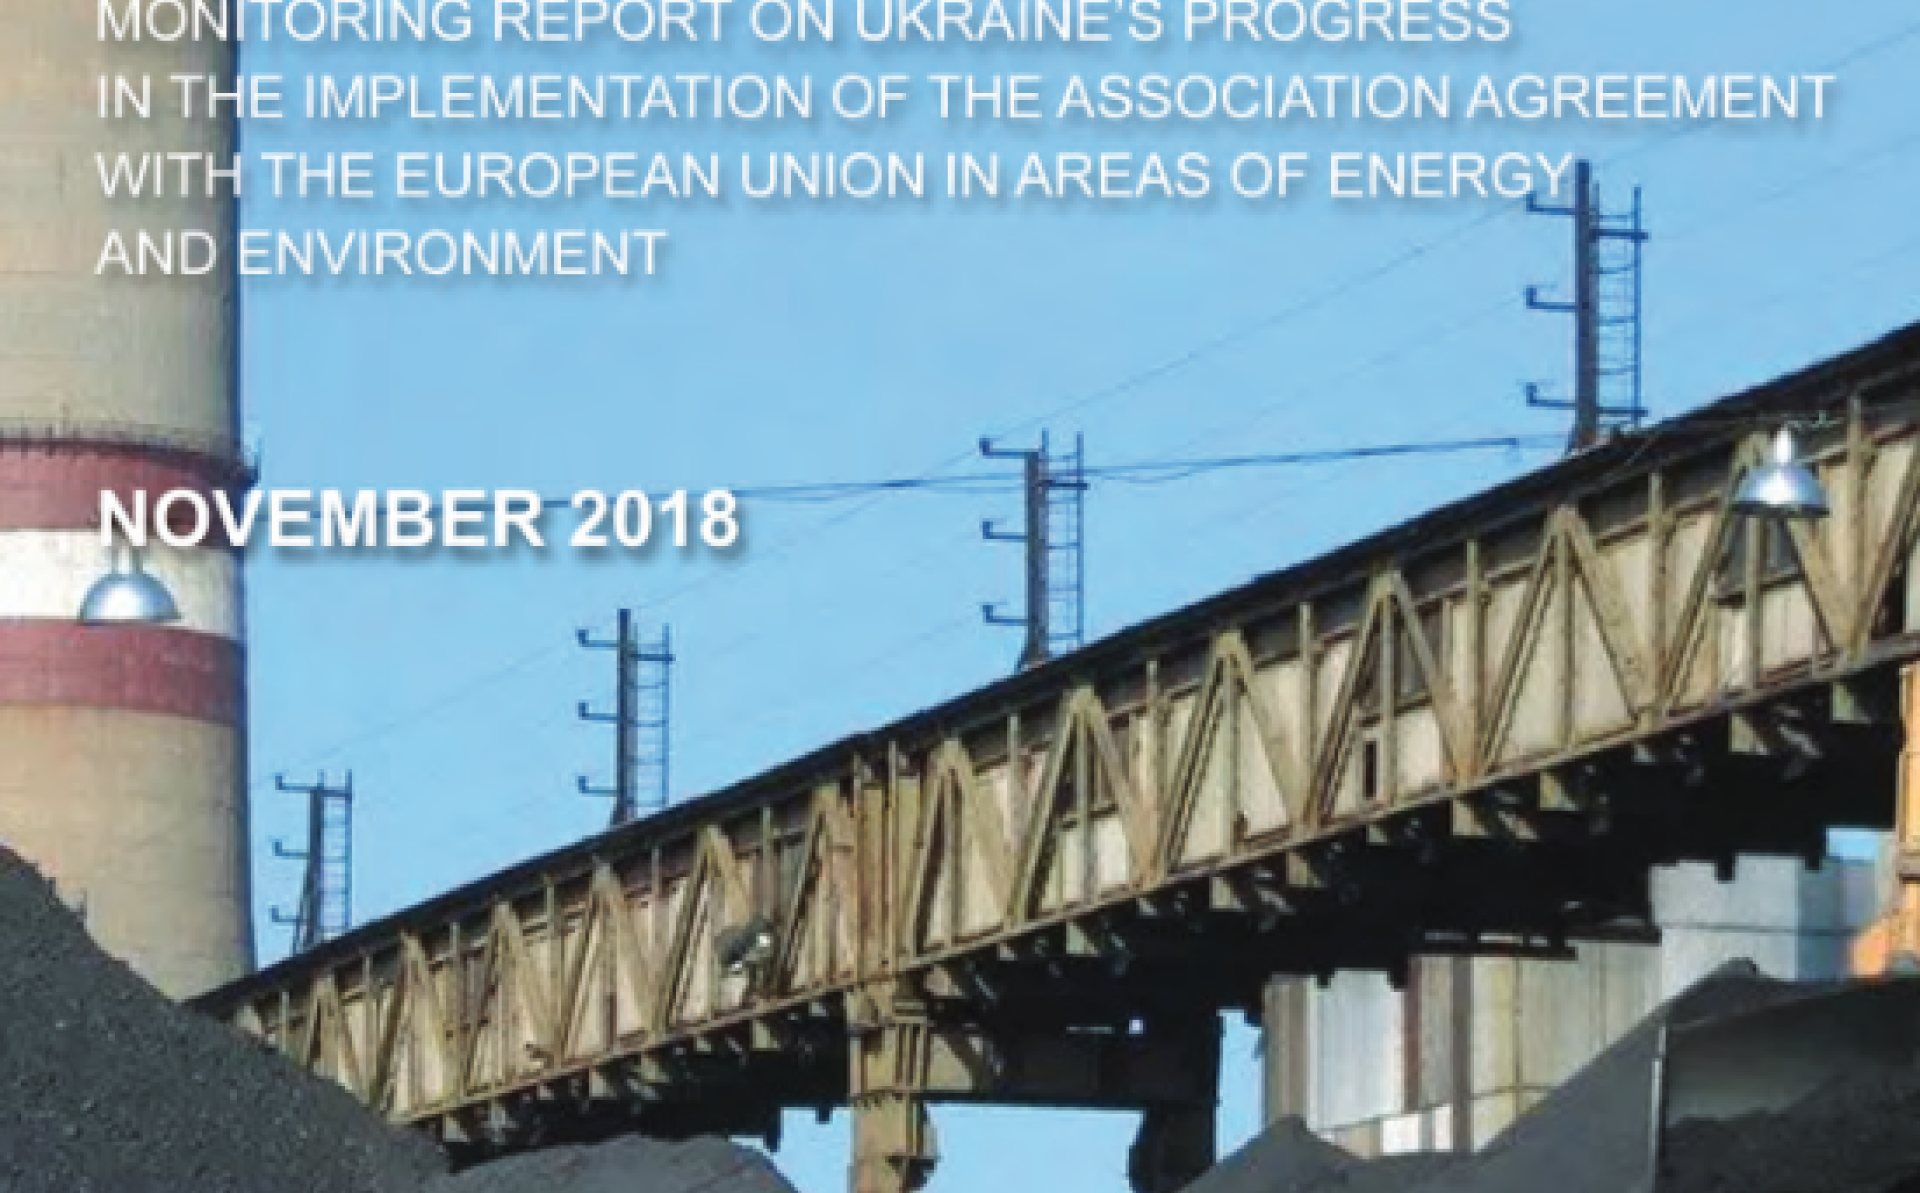 Energy reforms: Monitoring report on Ukraine’s progress in areas of energy and environment